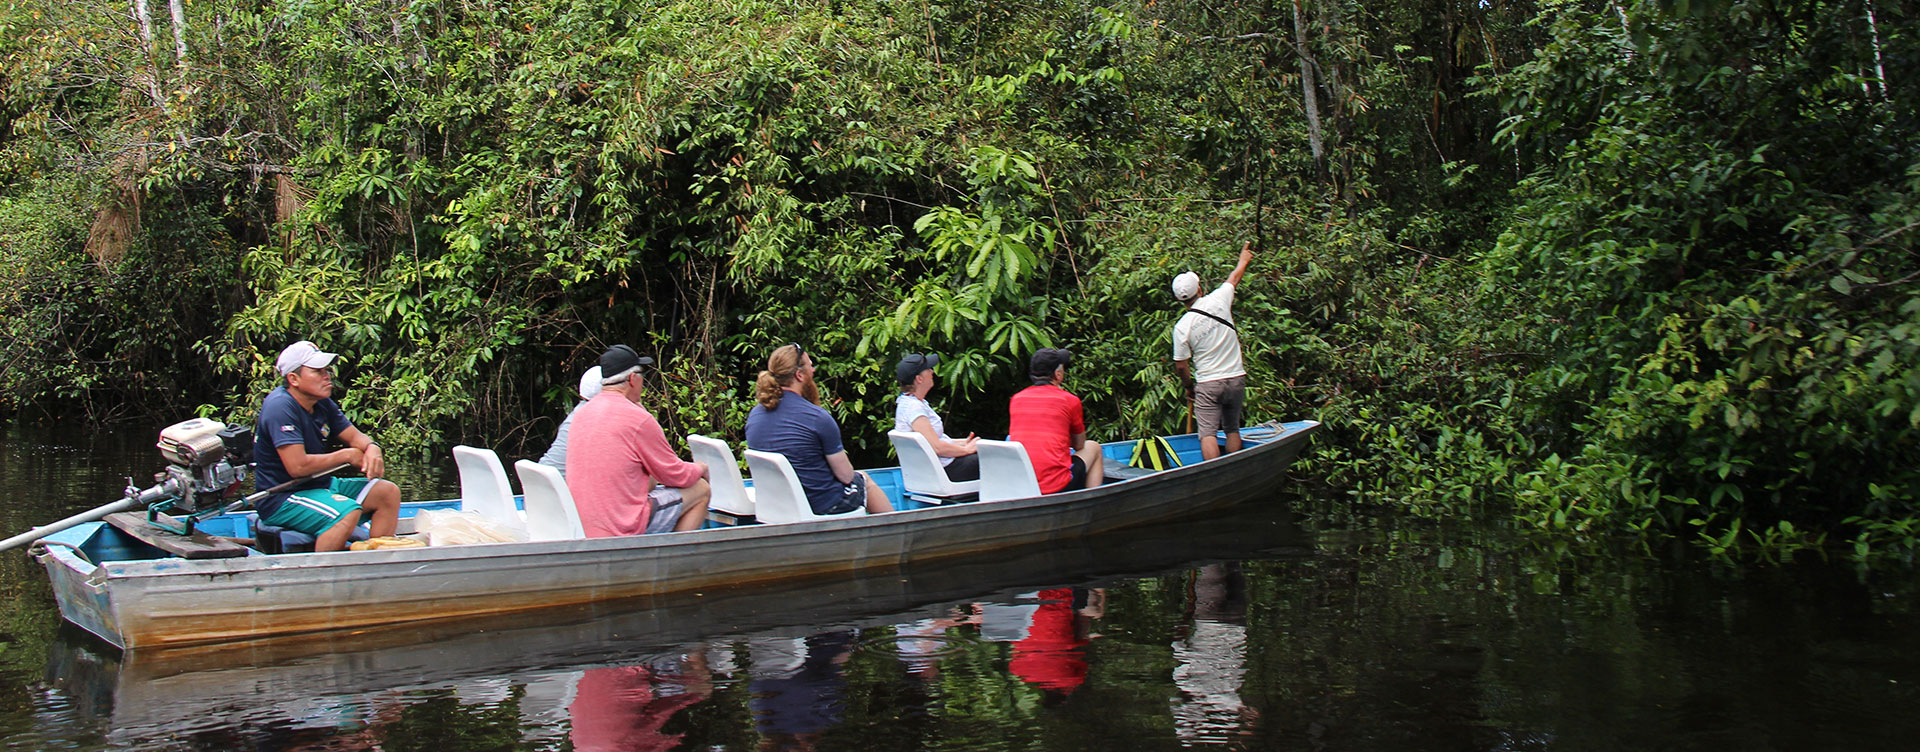 amazonia expeditions guide with tourists in boat